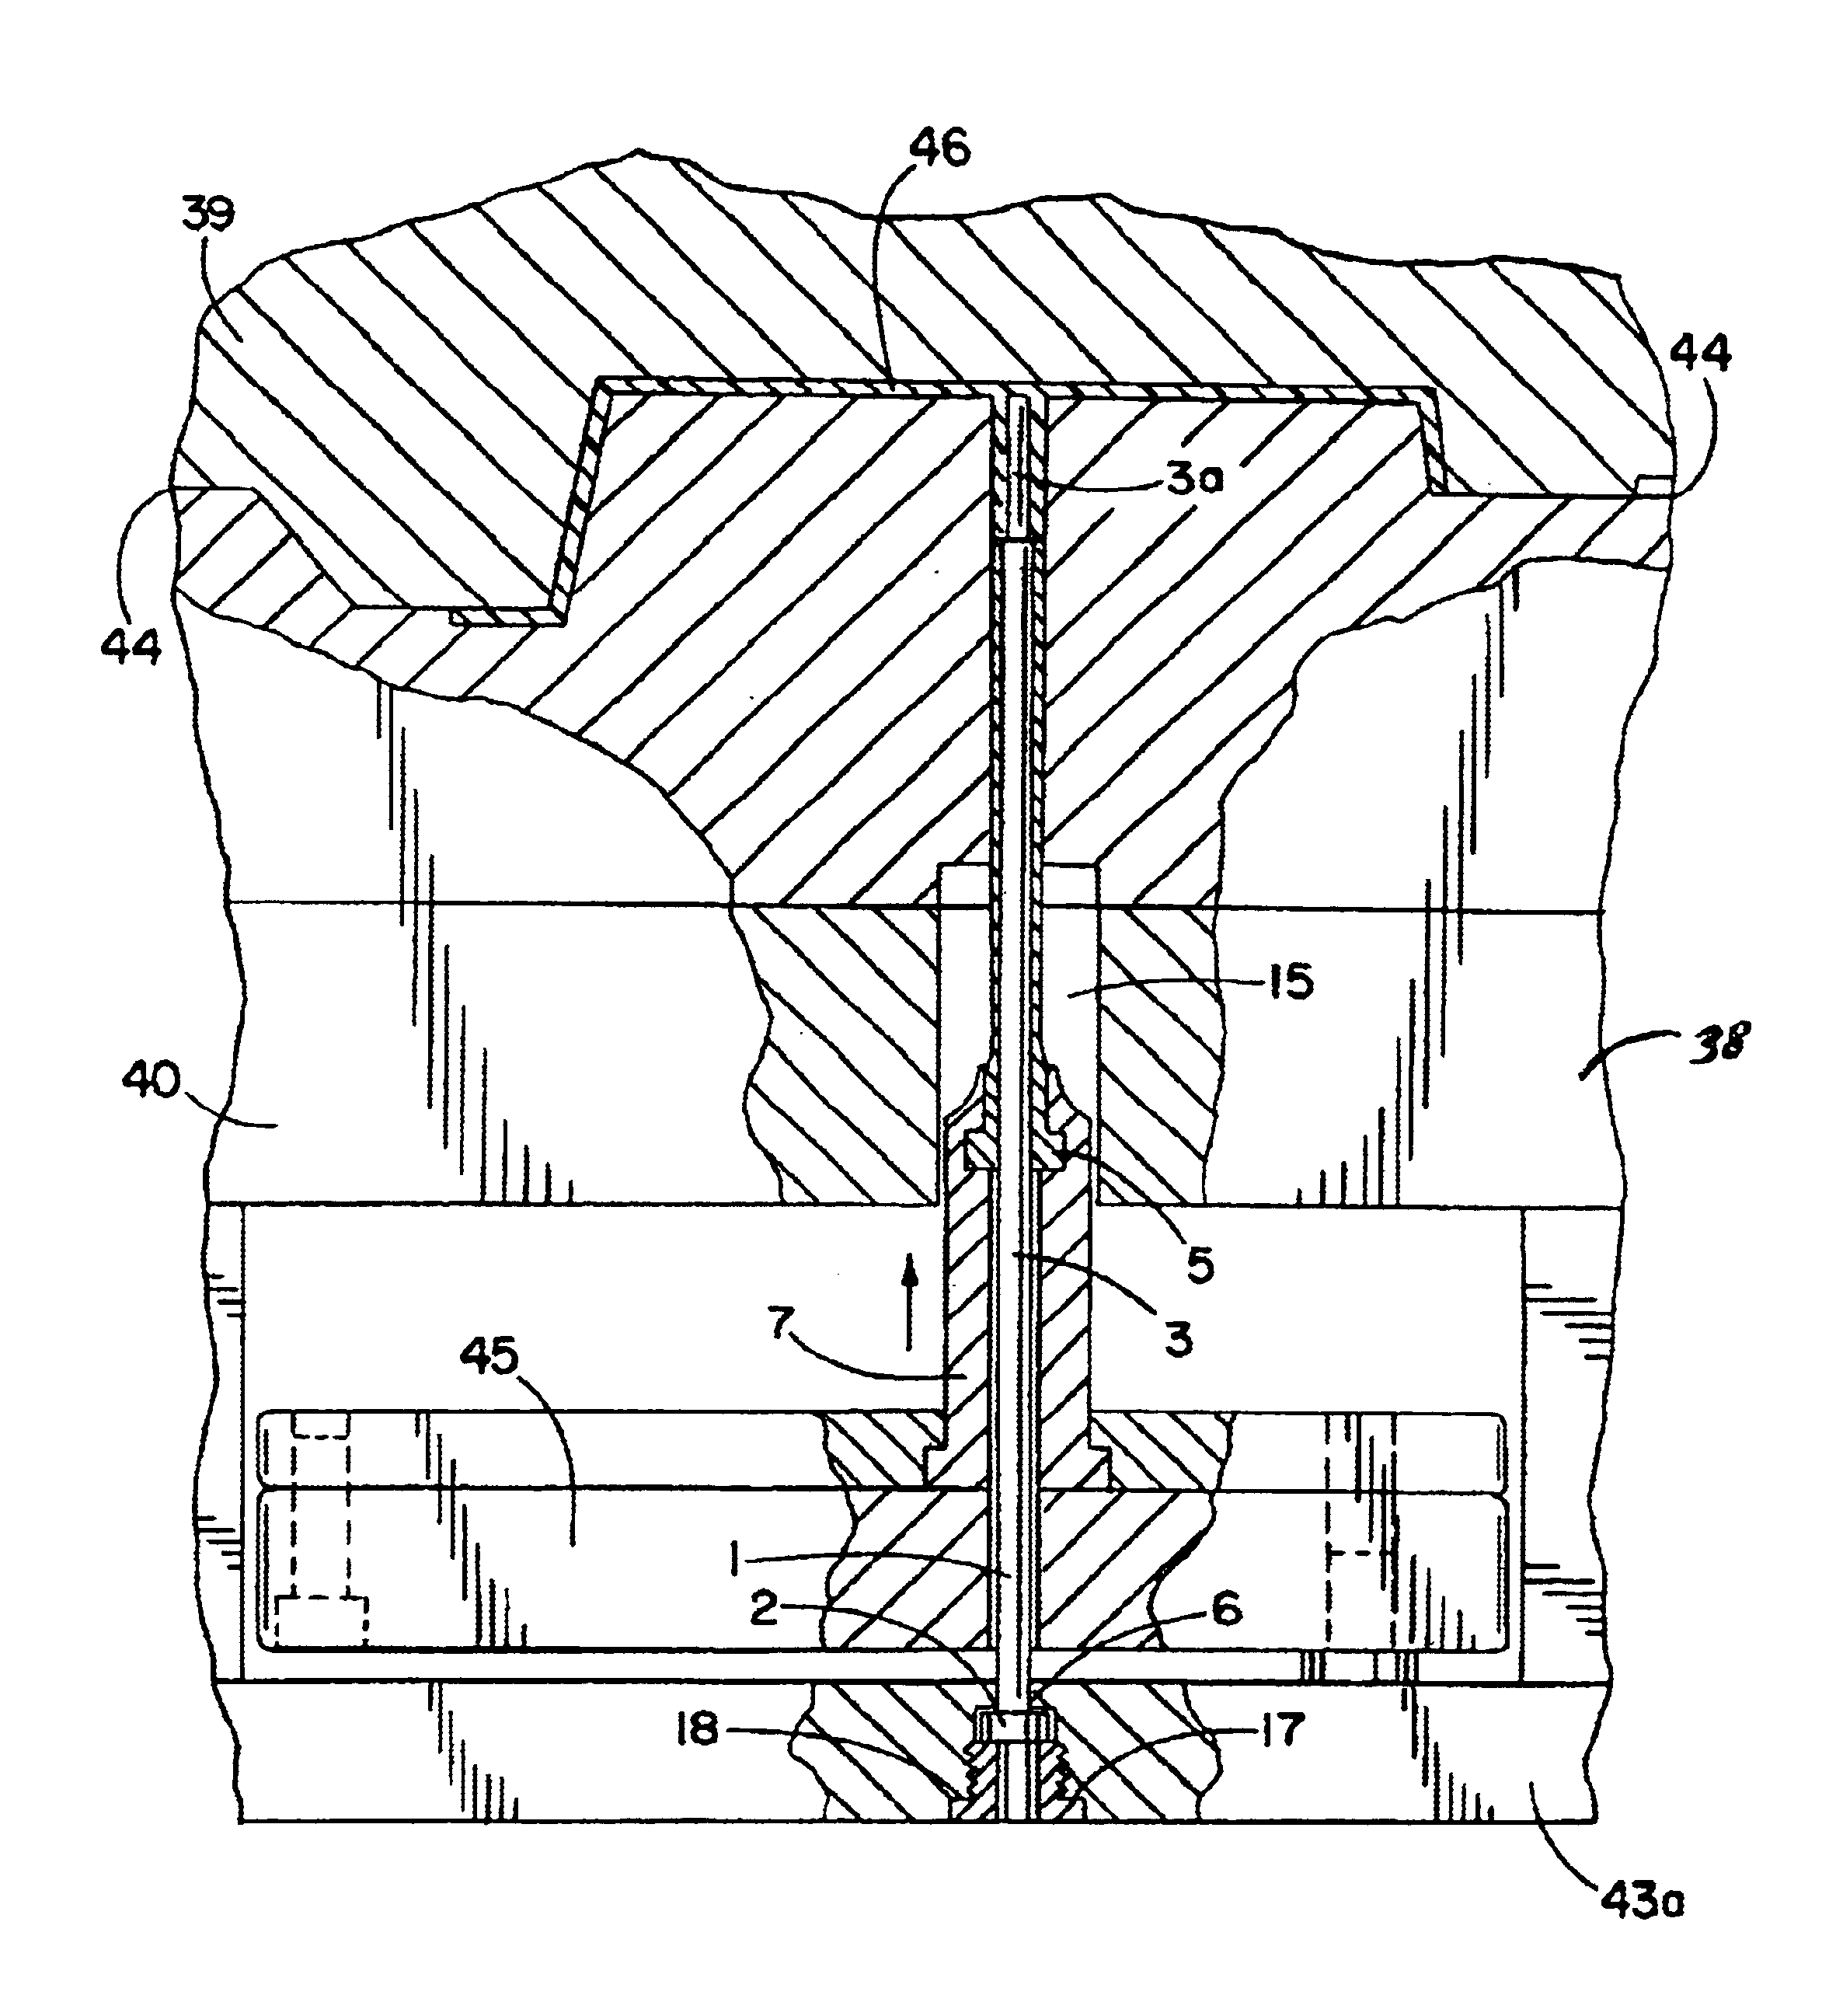 Ejector sleeve for molding a raised aperture in a molded article